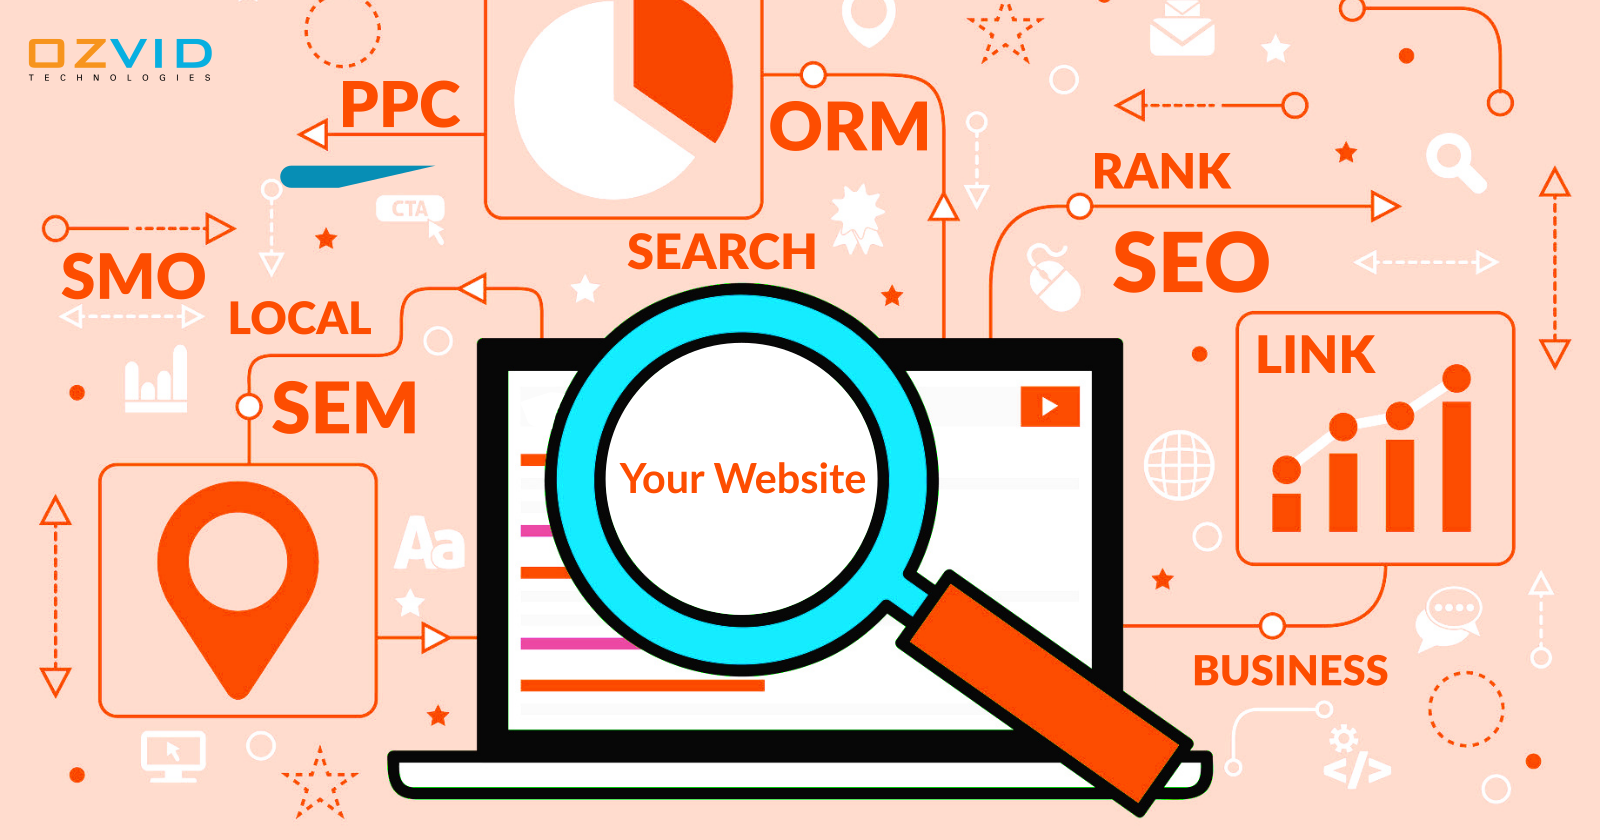 Top SEO Hacks to Make Sure Your Website is Found Easily on Google